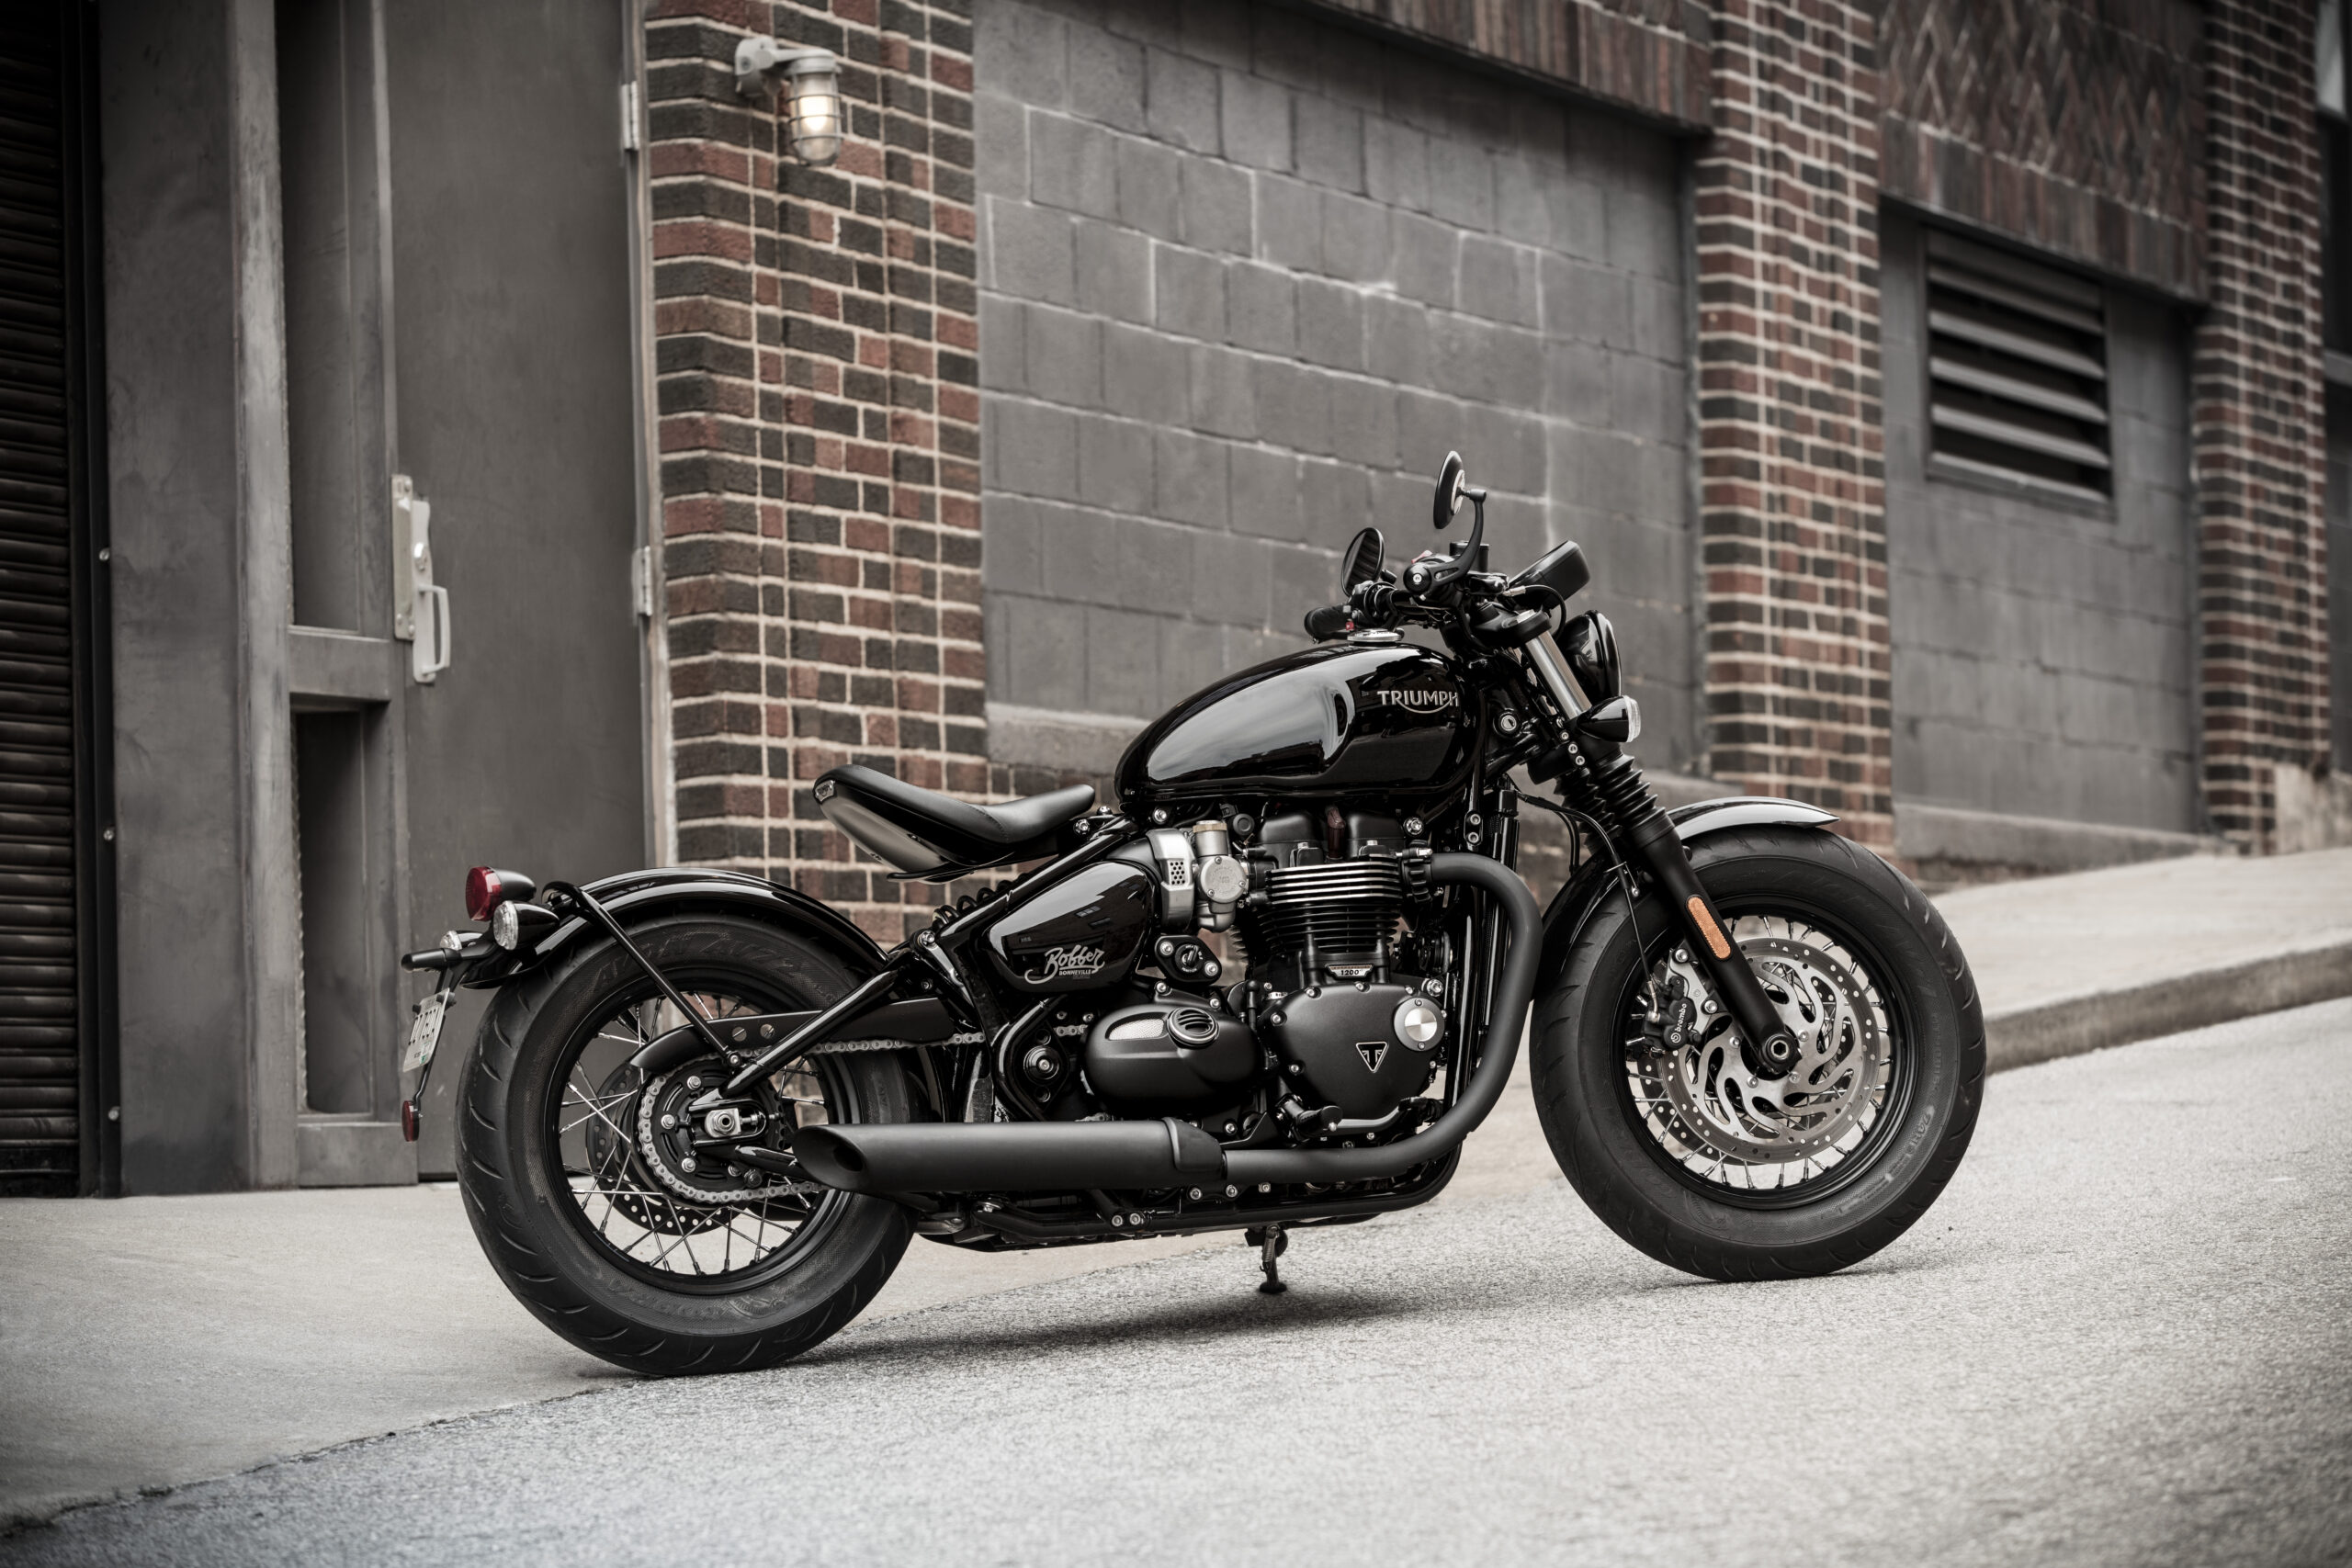 Triumph Motorcycles: Current Lineup, Models, News, & Reviews